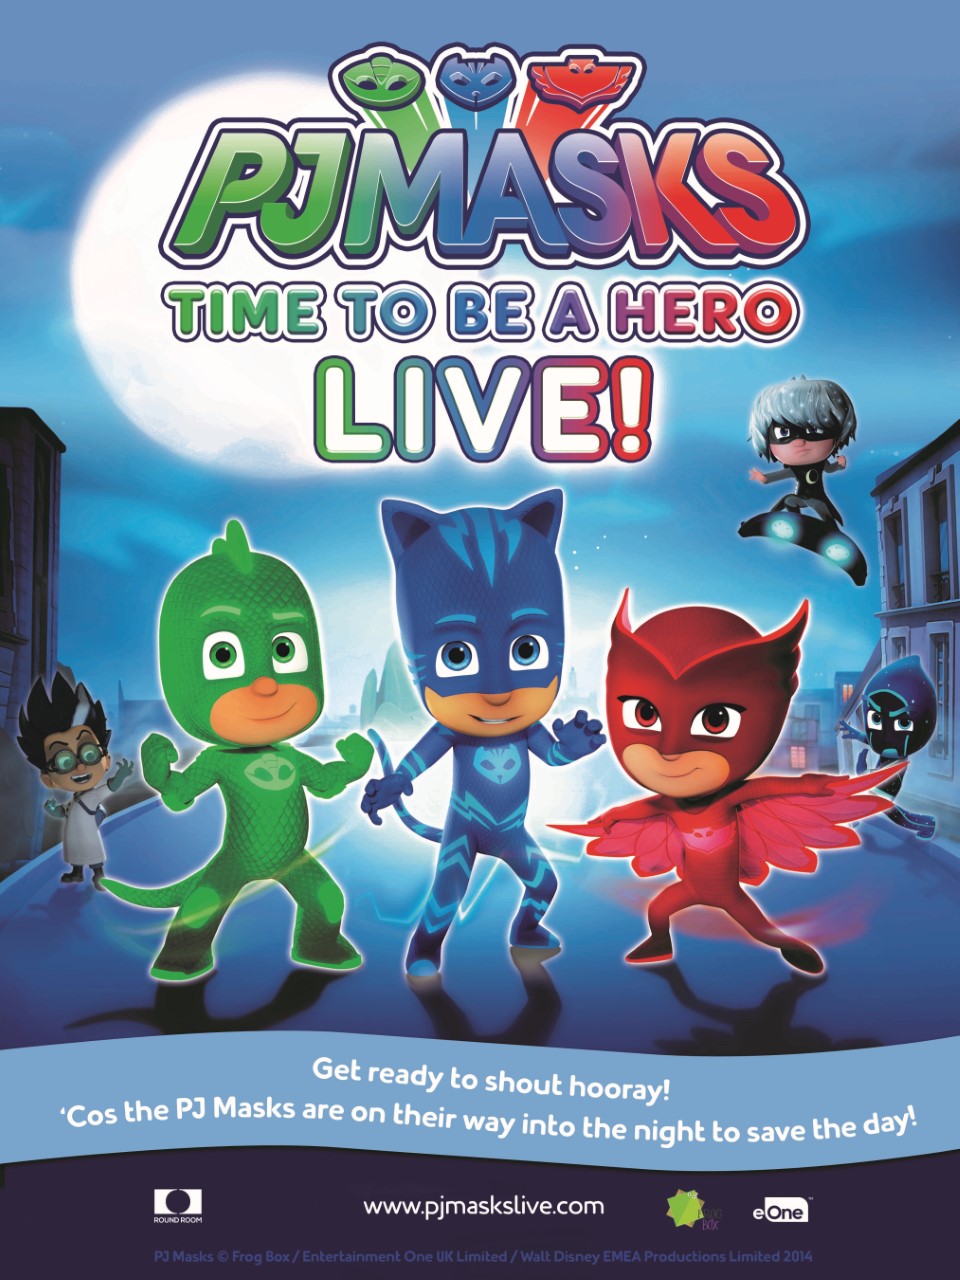 PJ Masks Live! Theatrical Tour Dates Released!